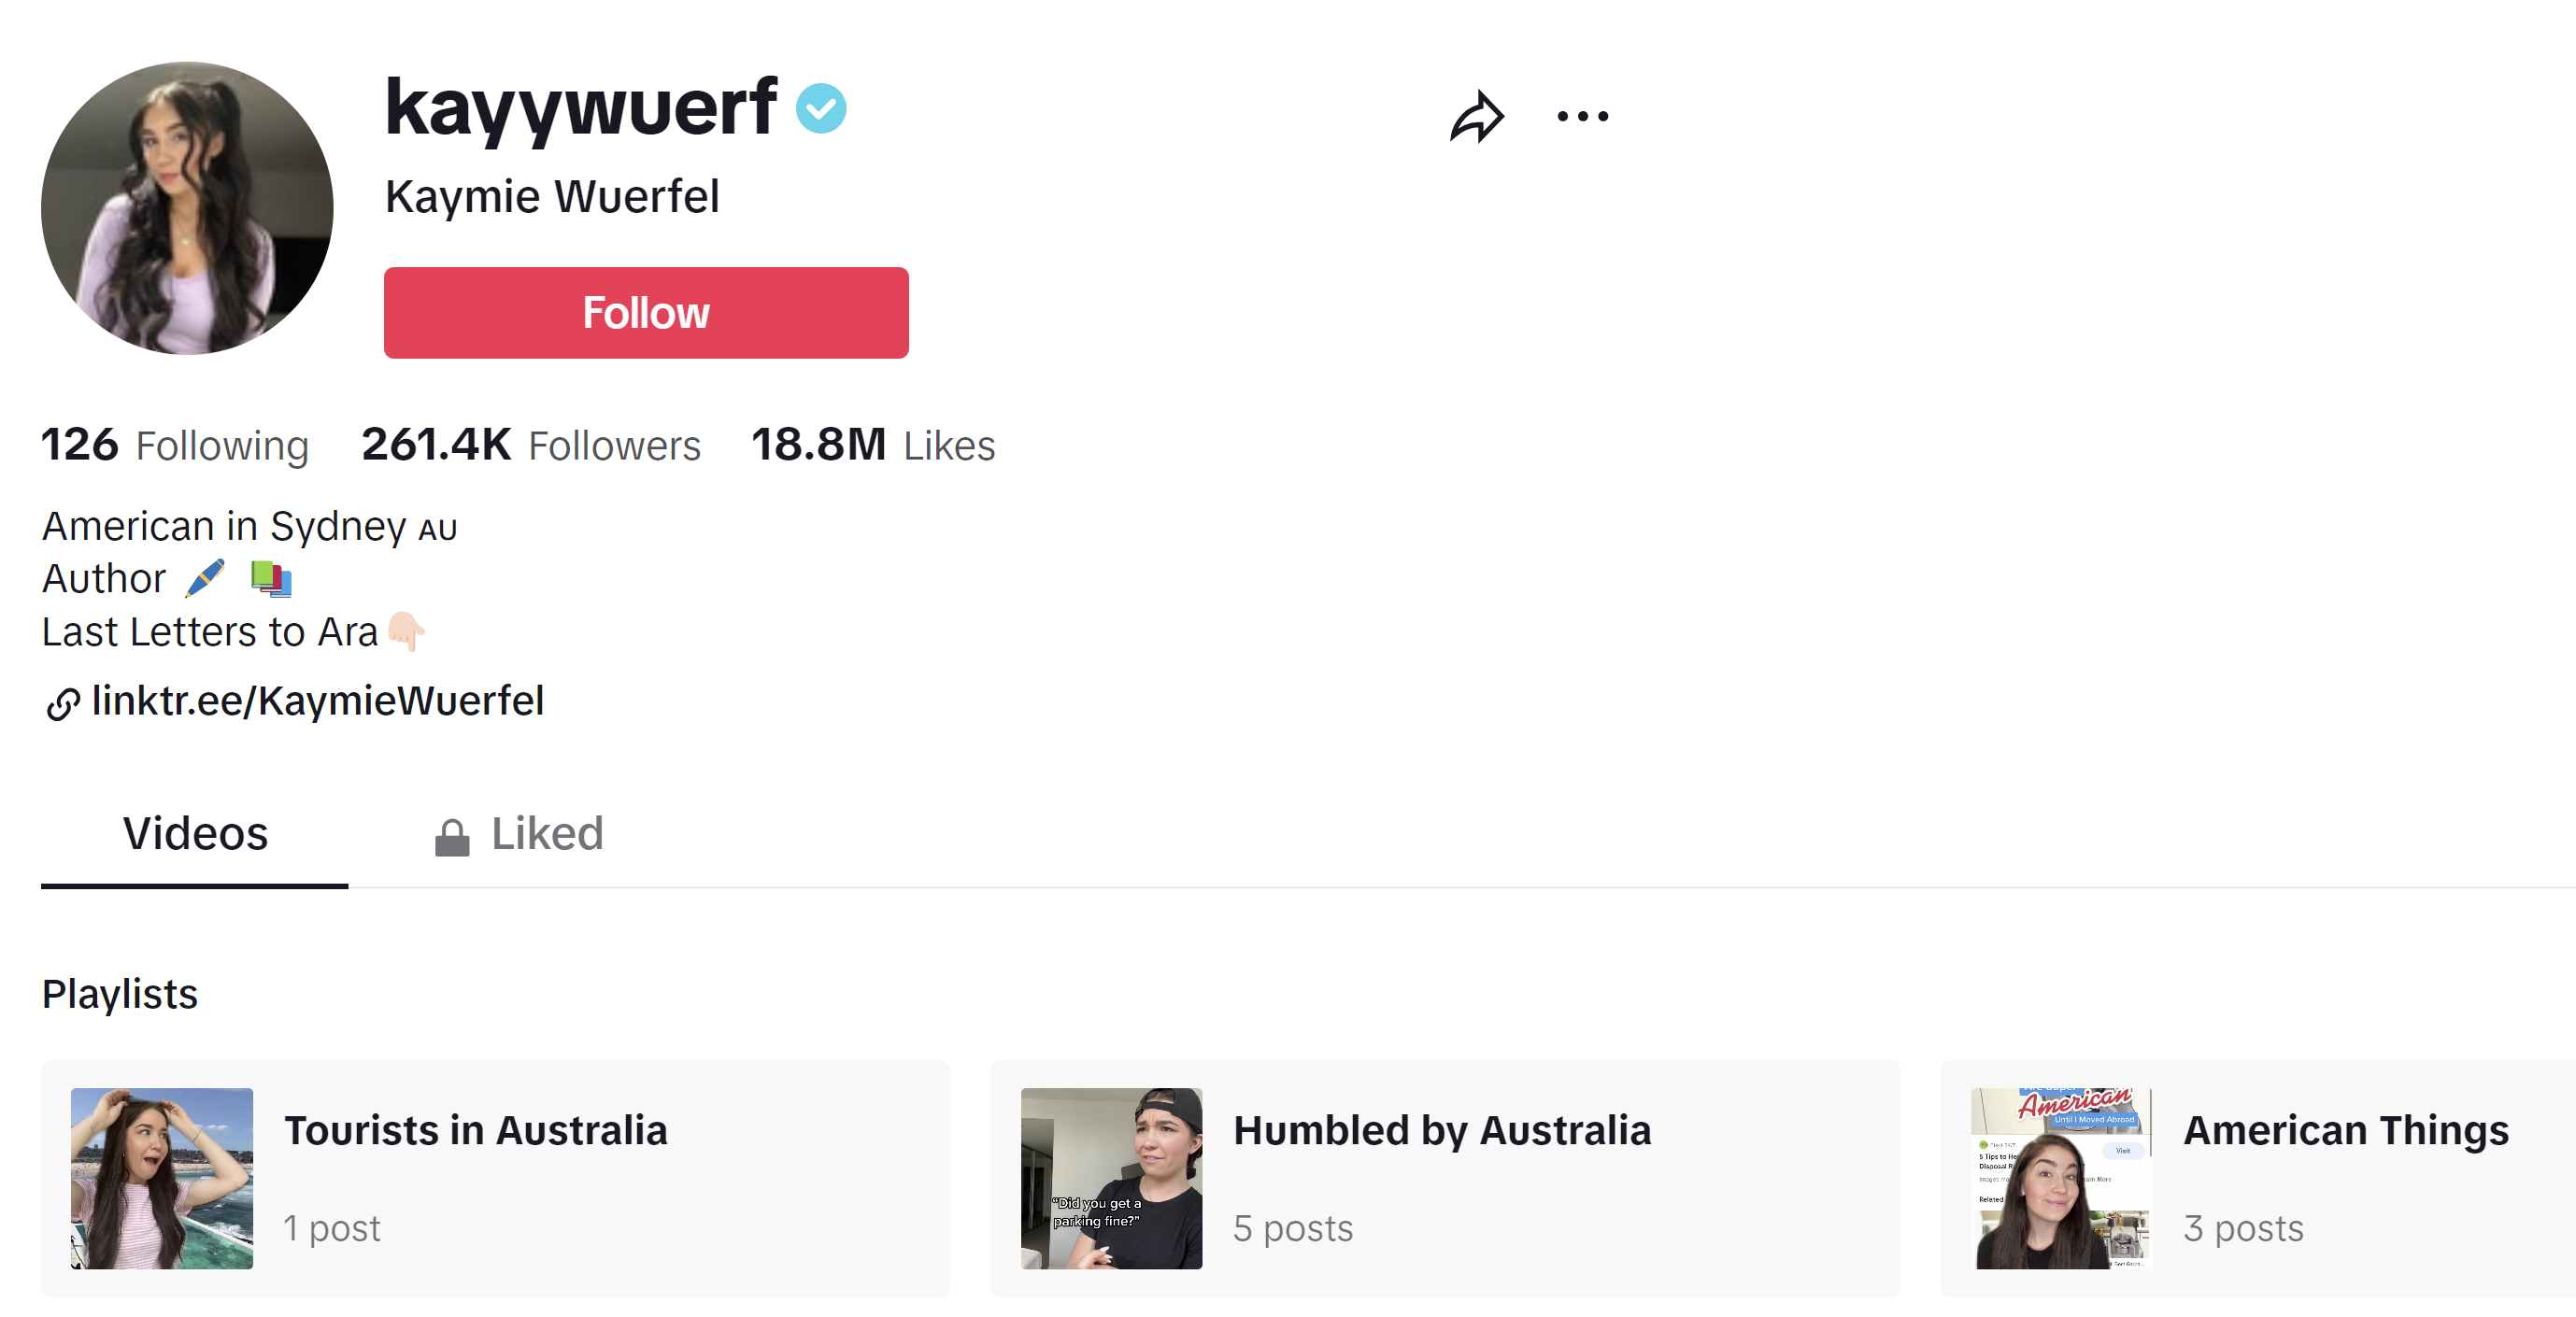 aussie%20author - How to Get Verified on TikTok: A Step-by-Step Guide